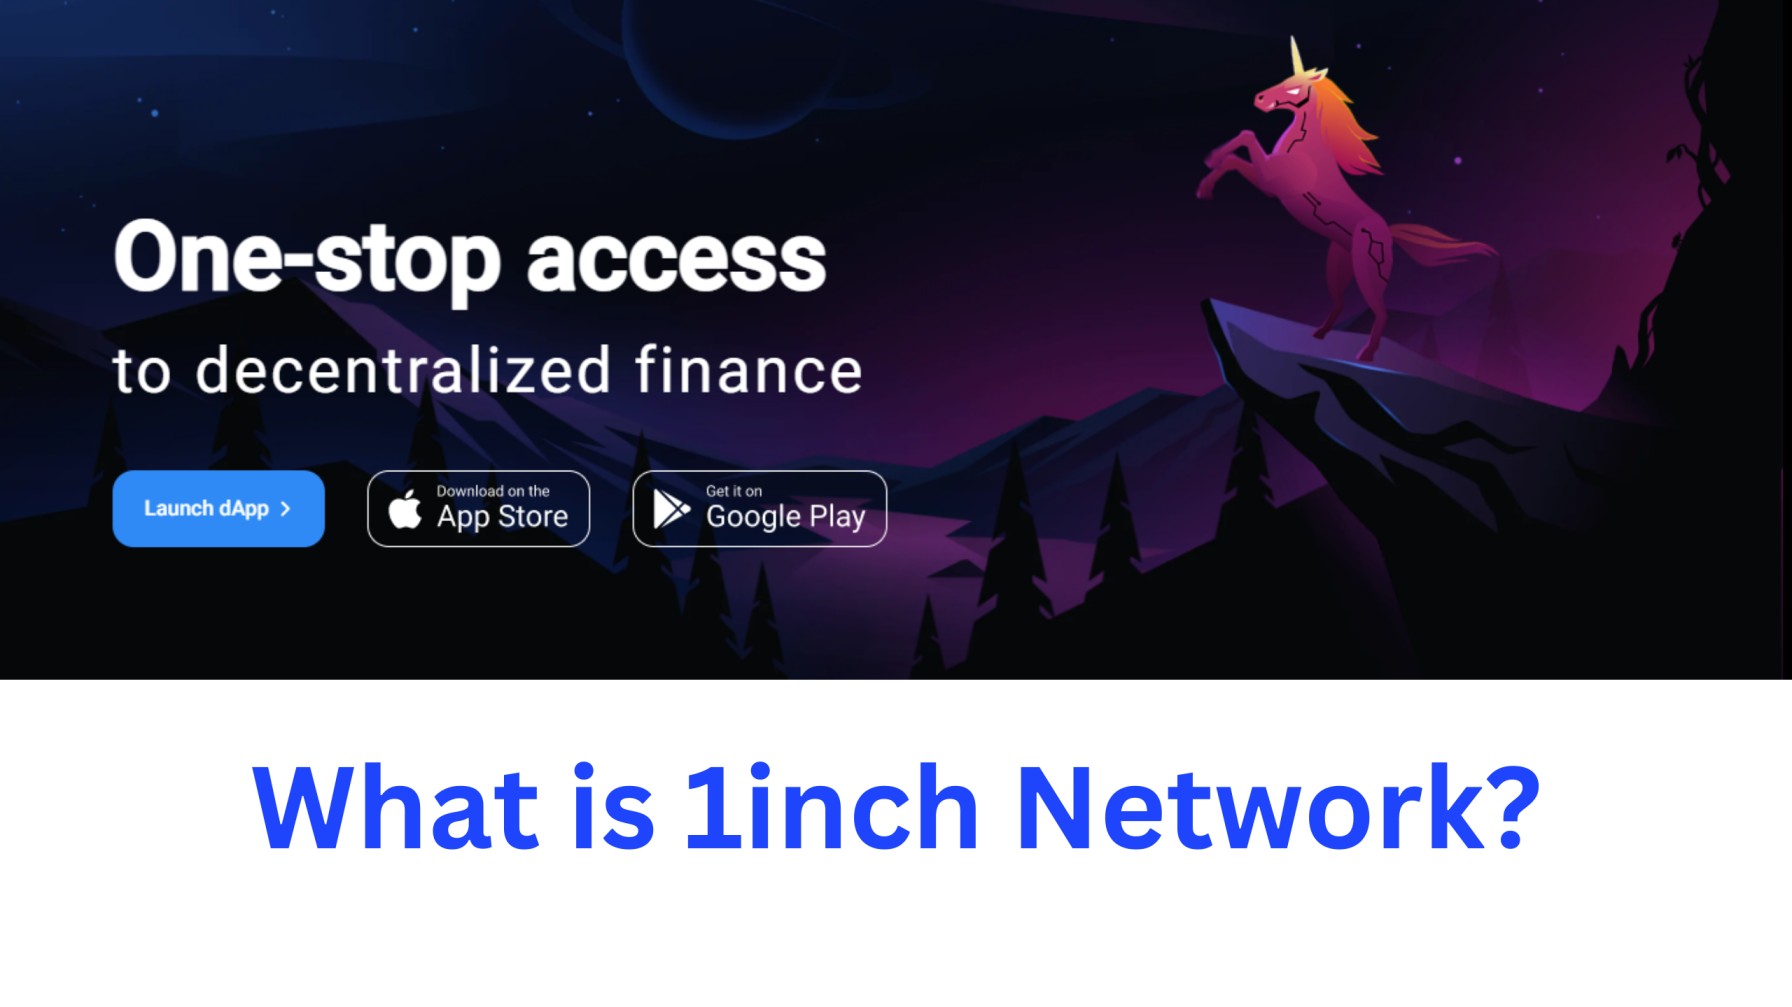 What is 1inch Network?